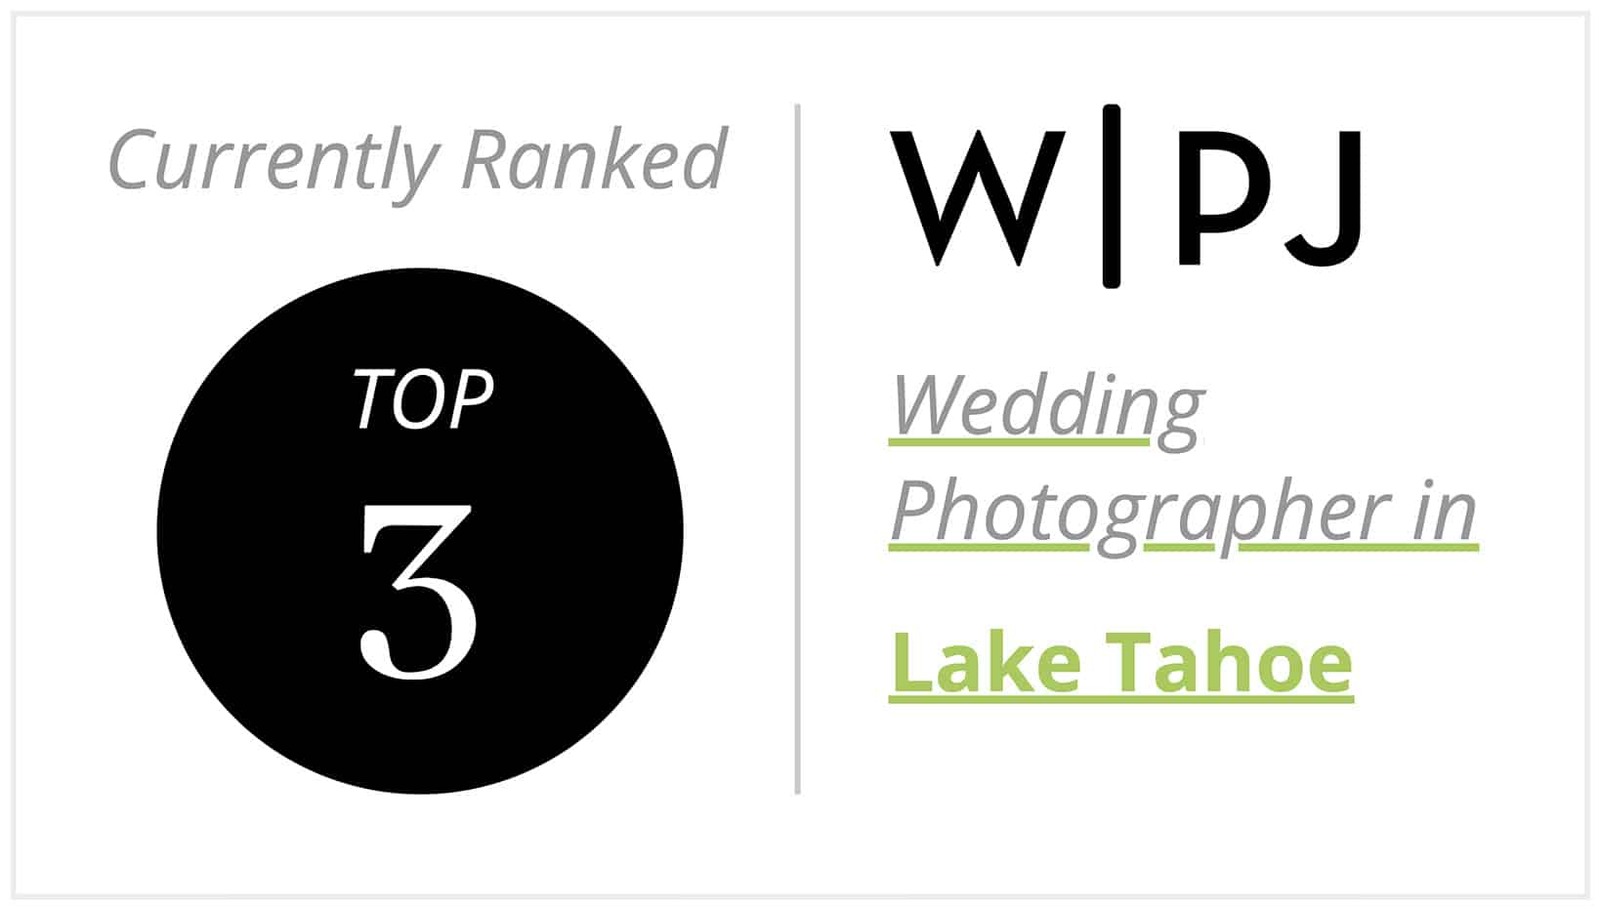 Award for being one of the best wedding photographers in Lake Tahoe